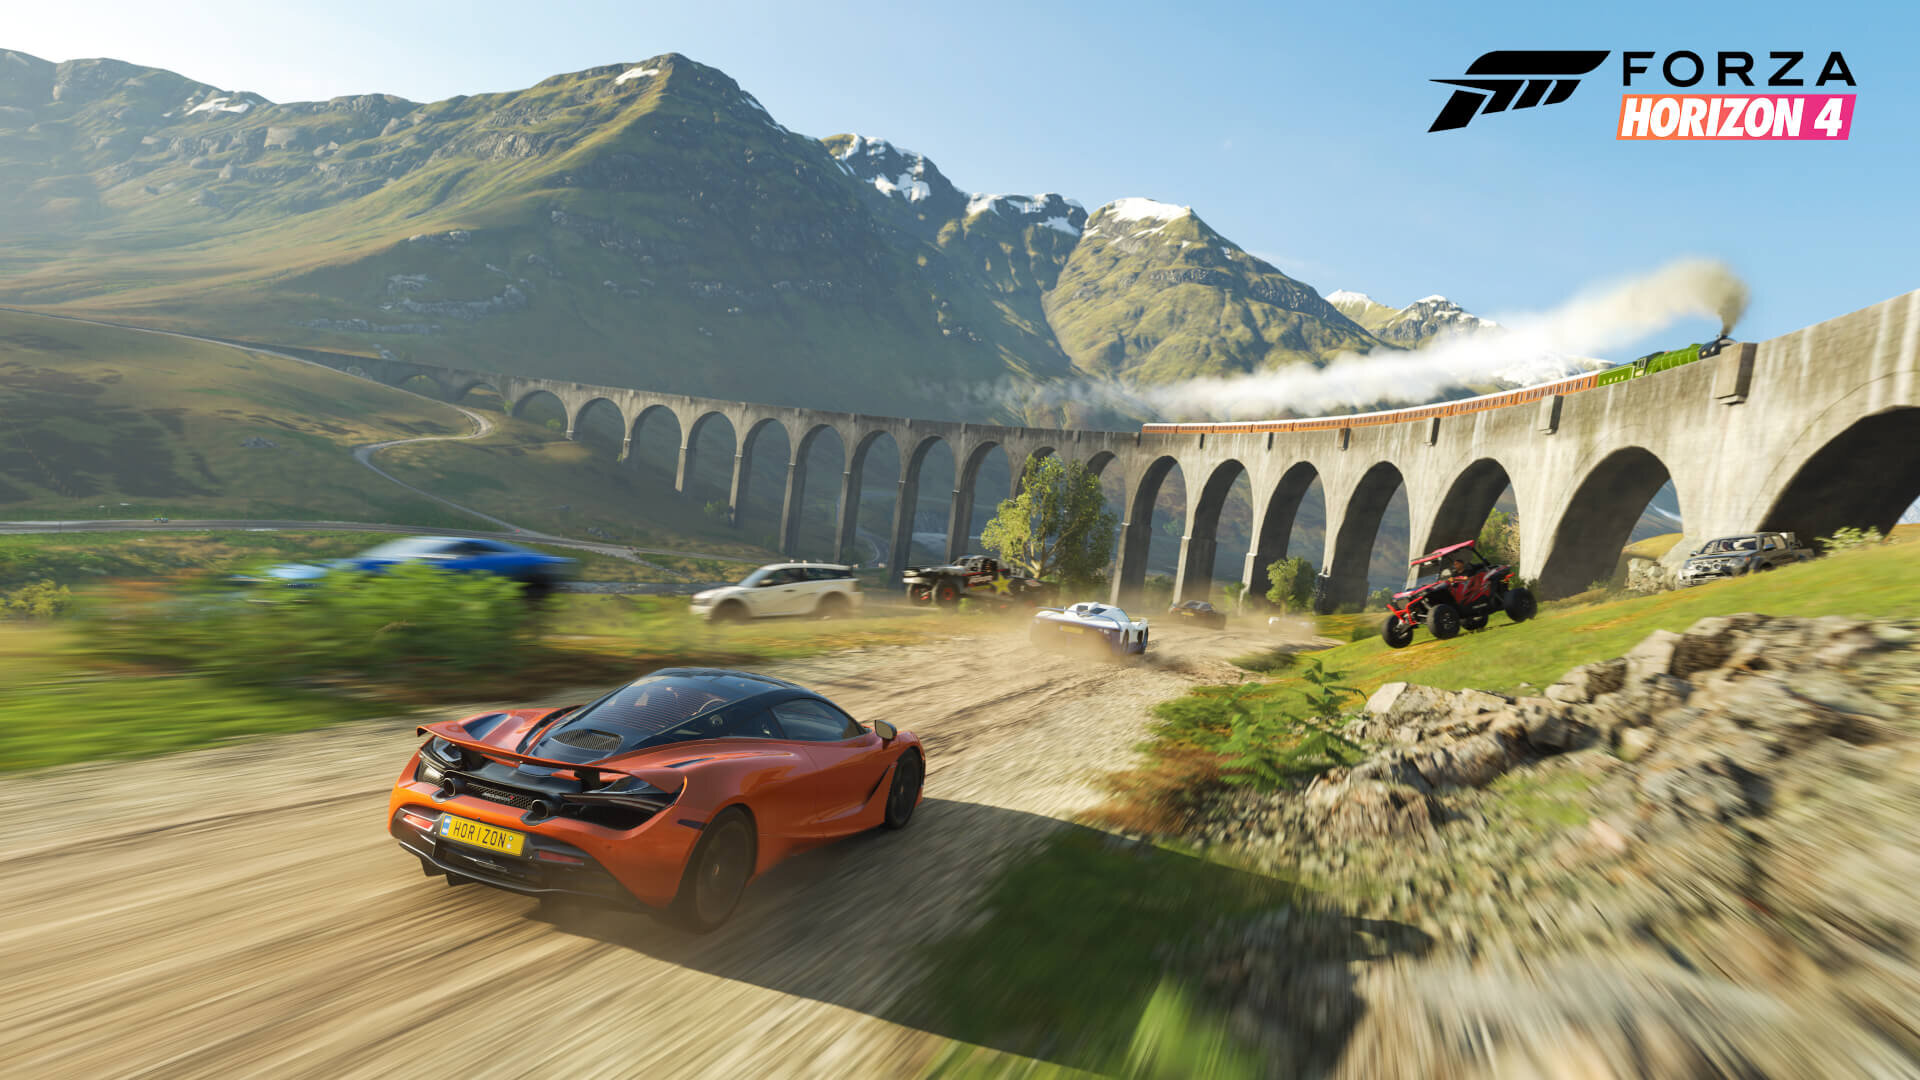 New racing video game uses Mexico as a backdrop